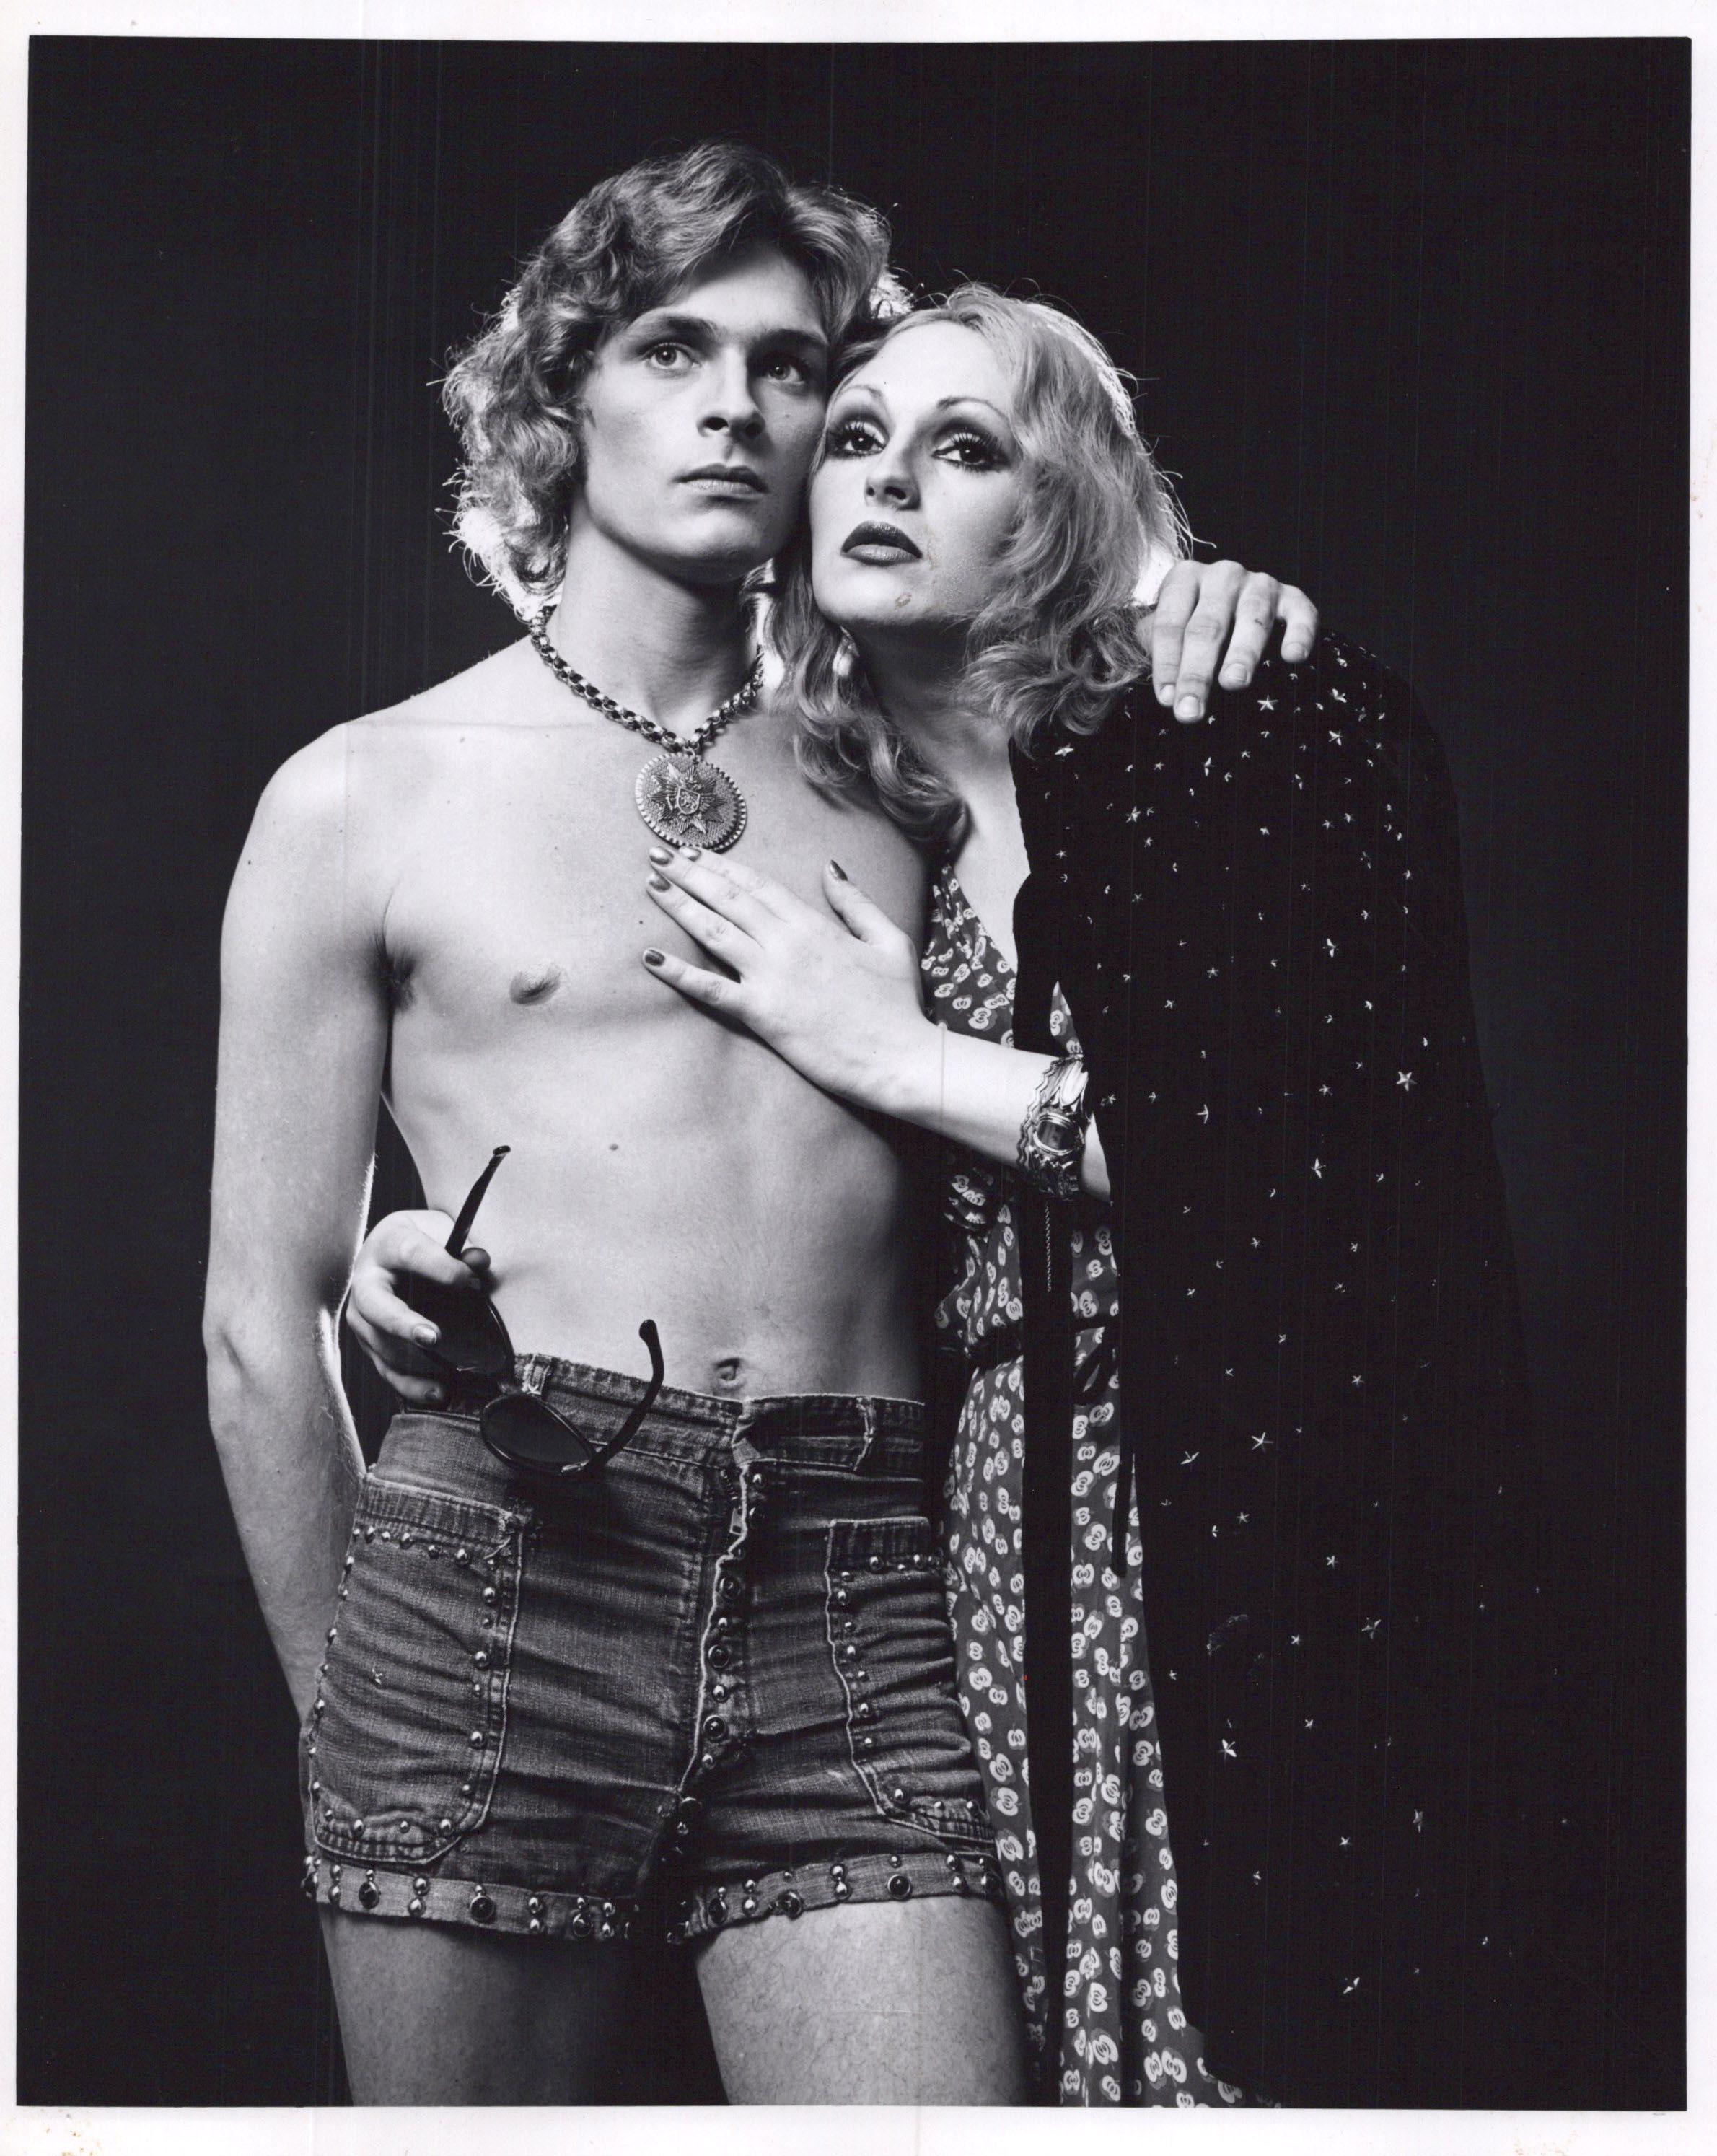 Jack Mitchell Black and White Photograph - Andy Warhol Superstar Candy Darling and Dorian Gray